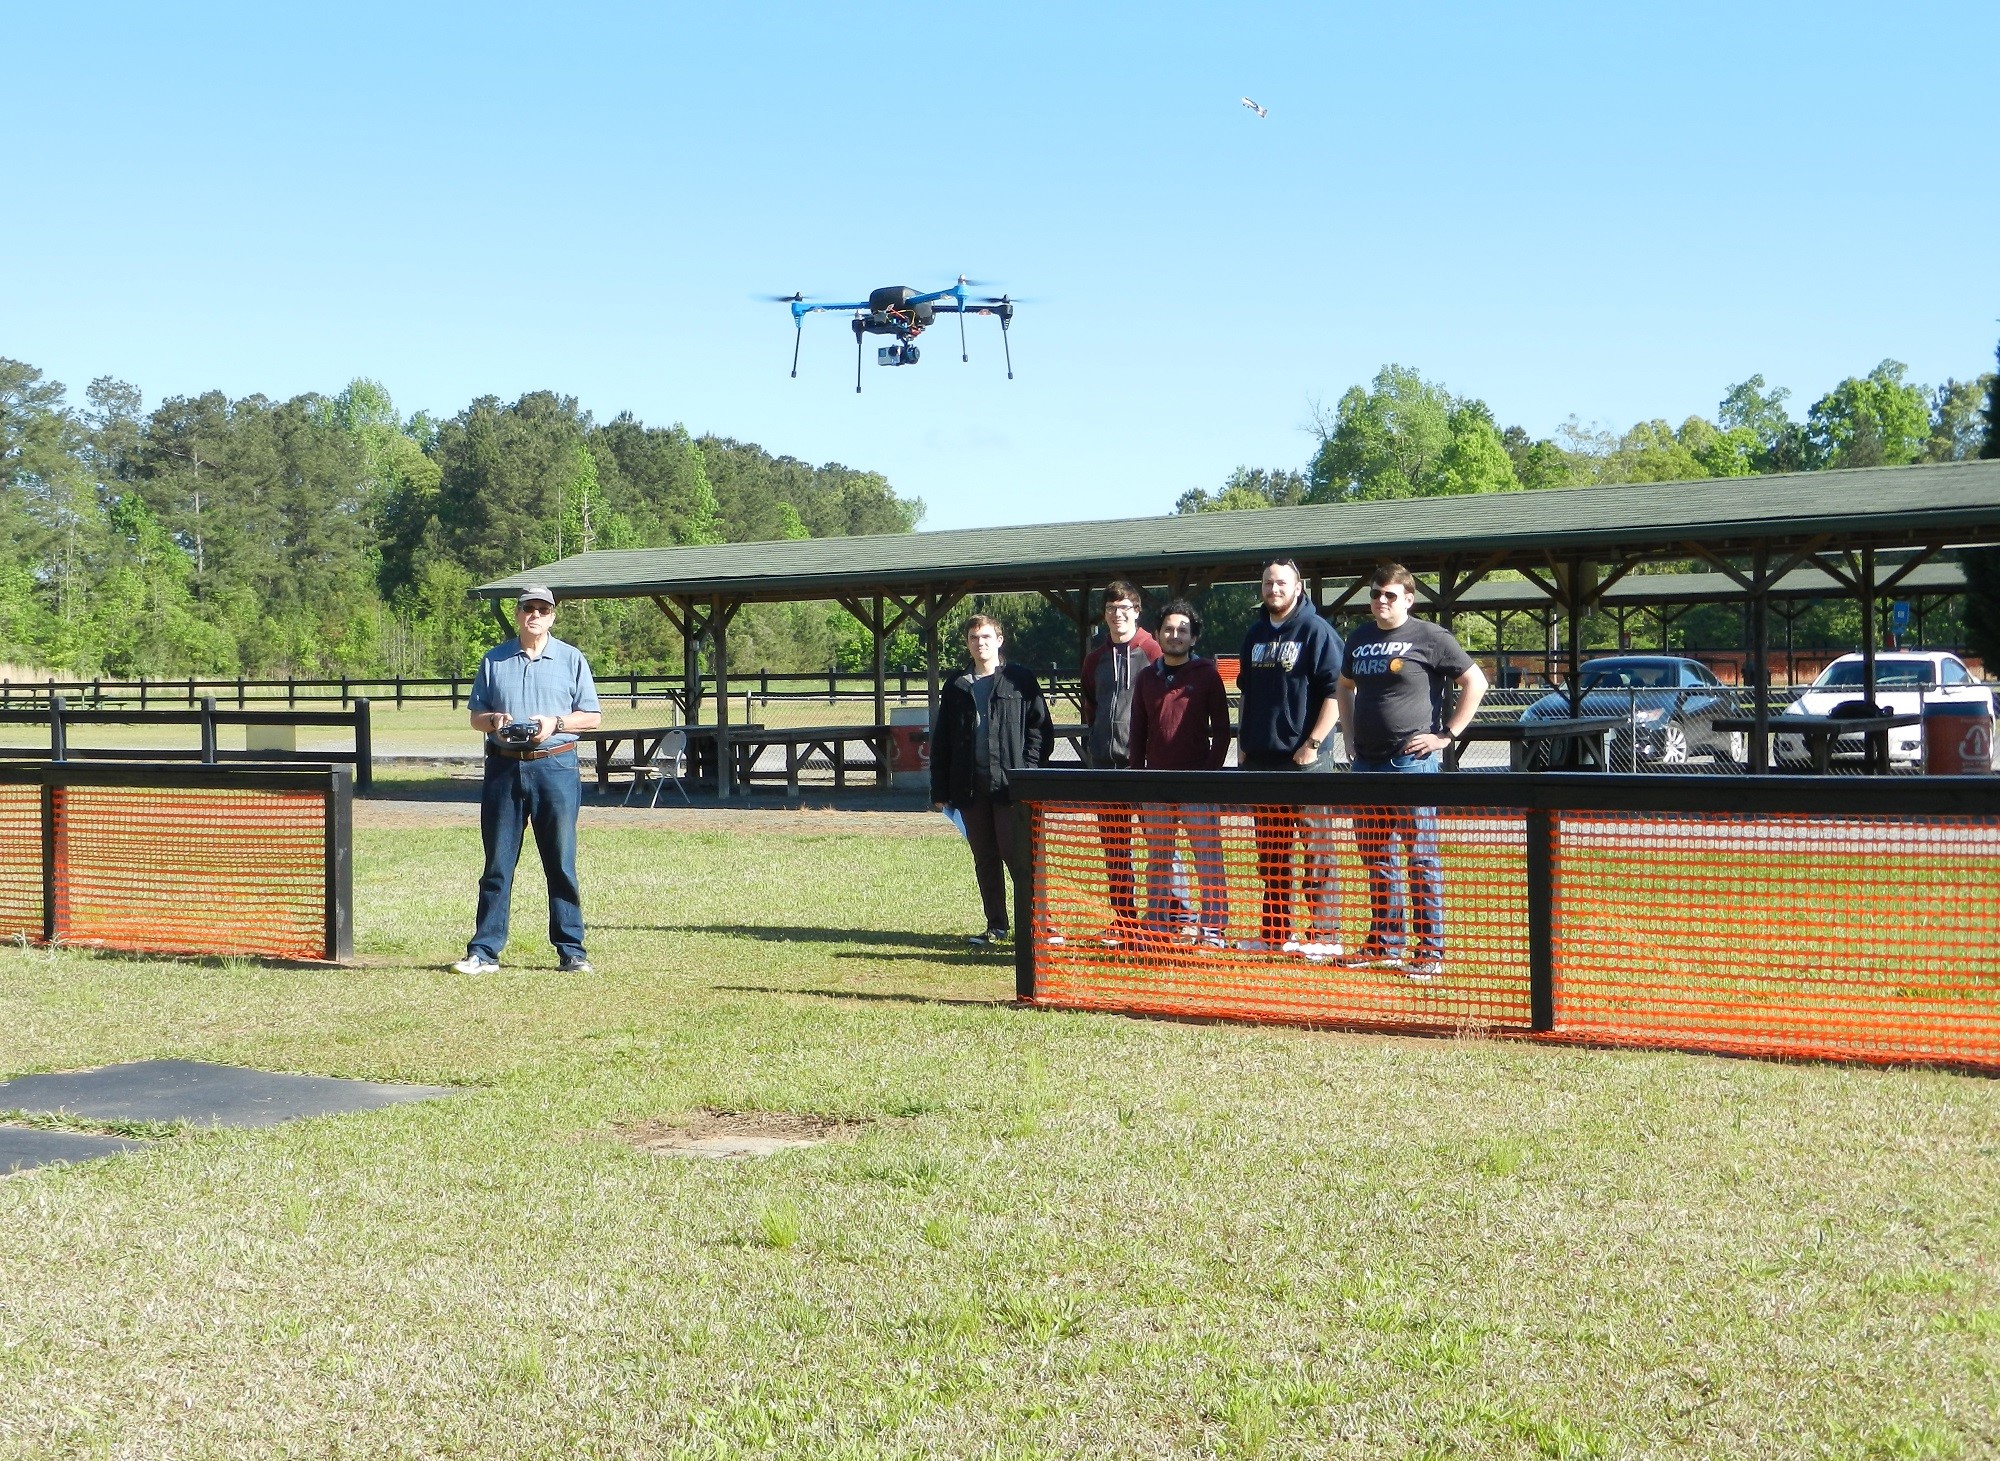 A flying quadcopter being observed by a group of people